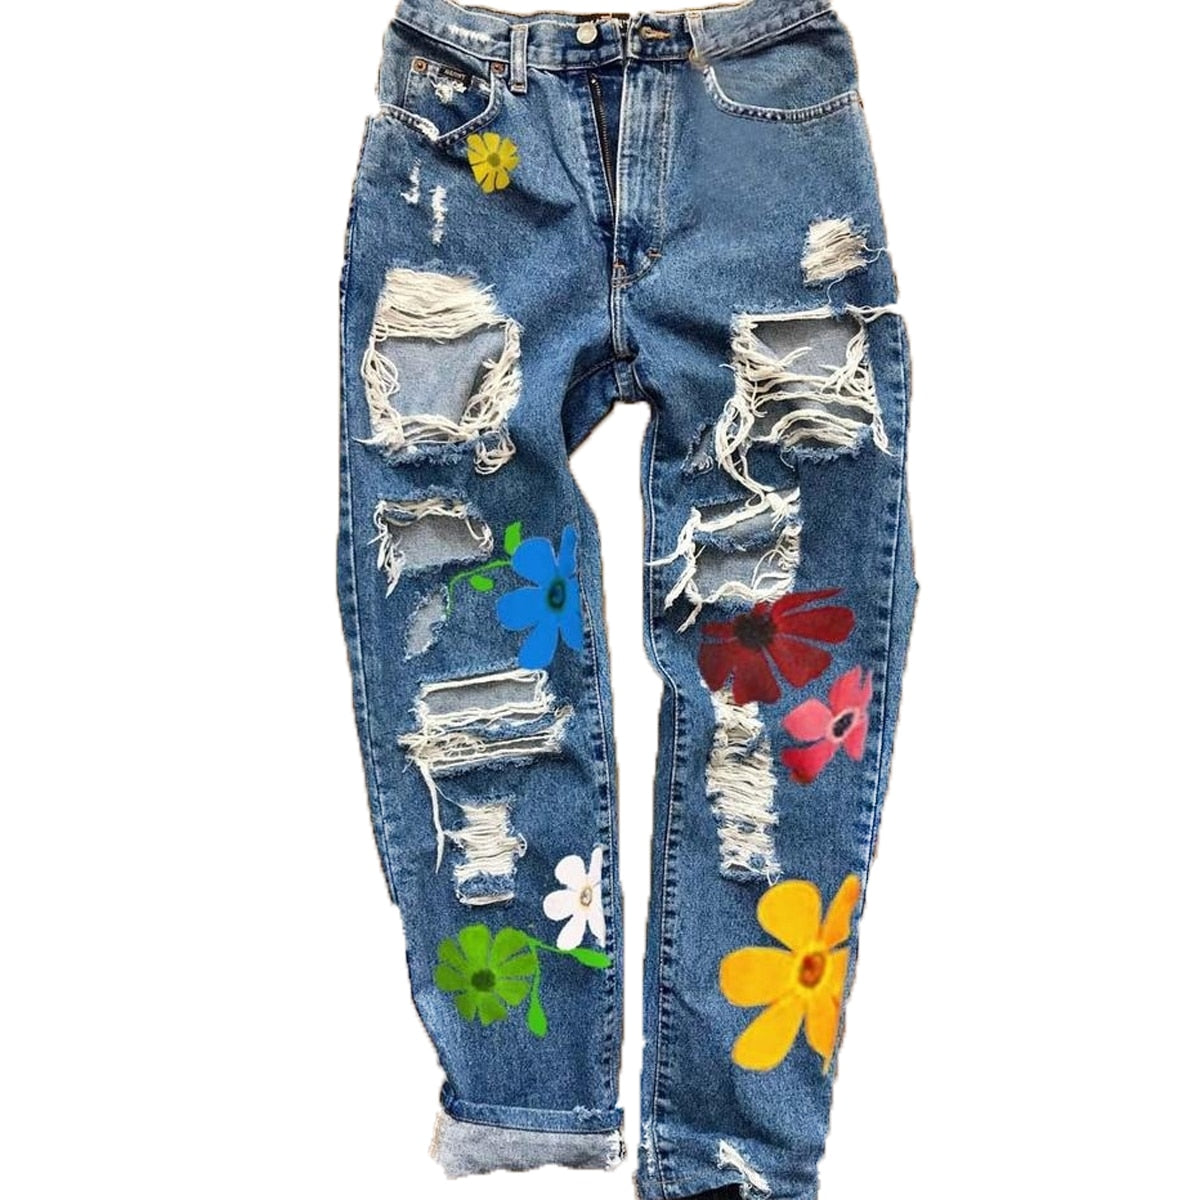 Distressed With Printed Flowers Pants